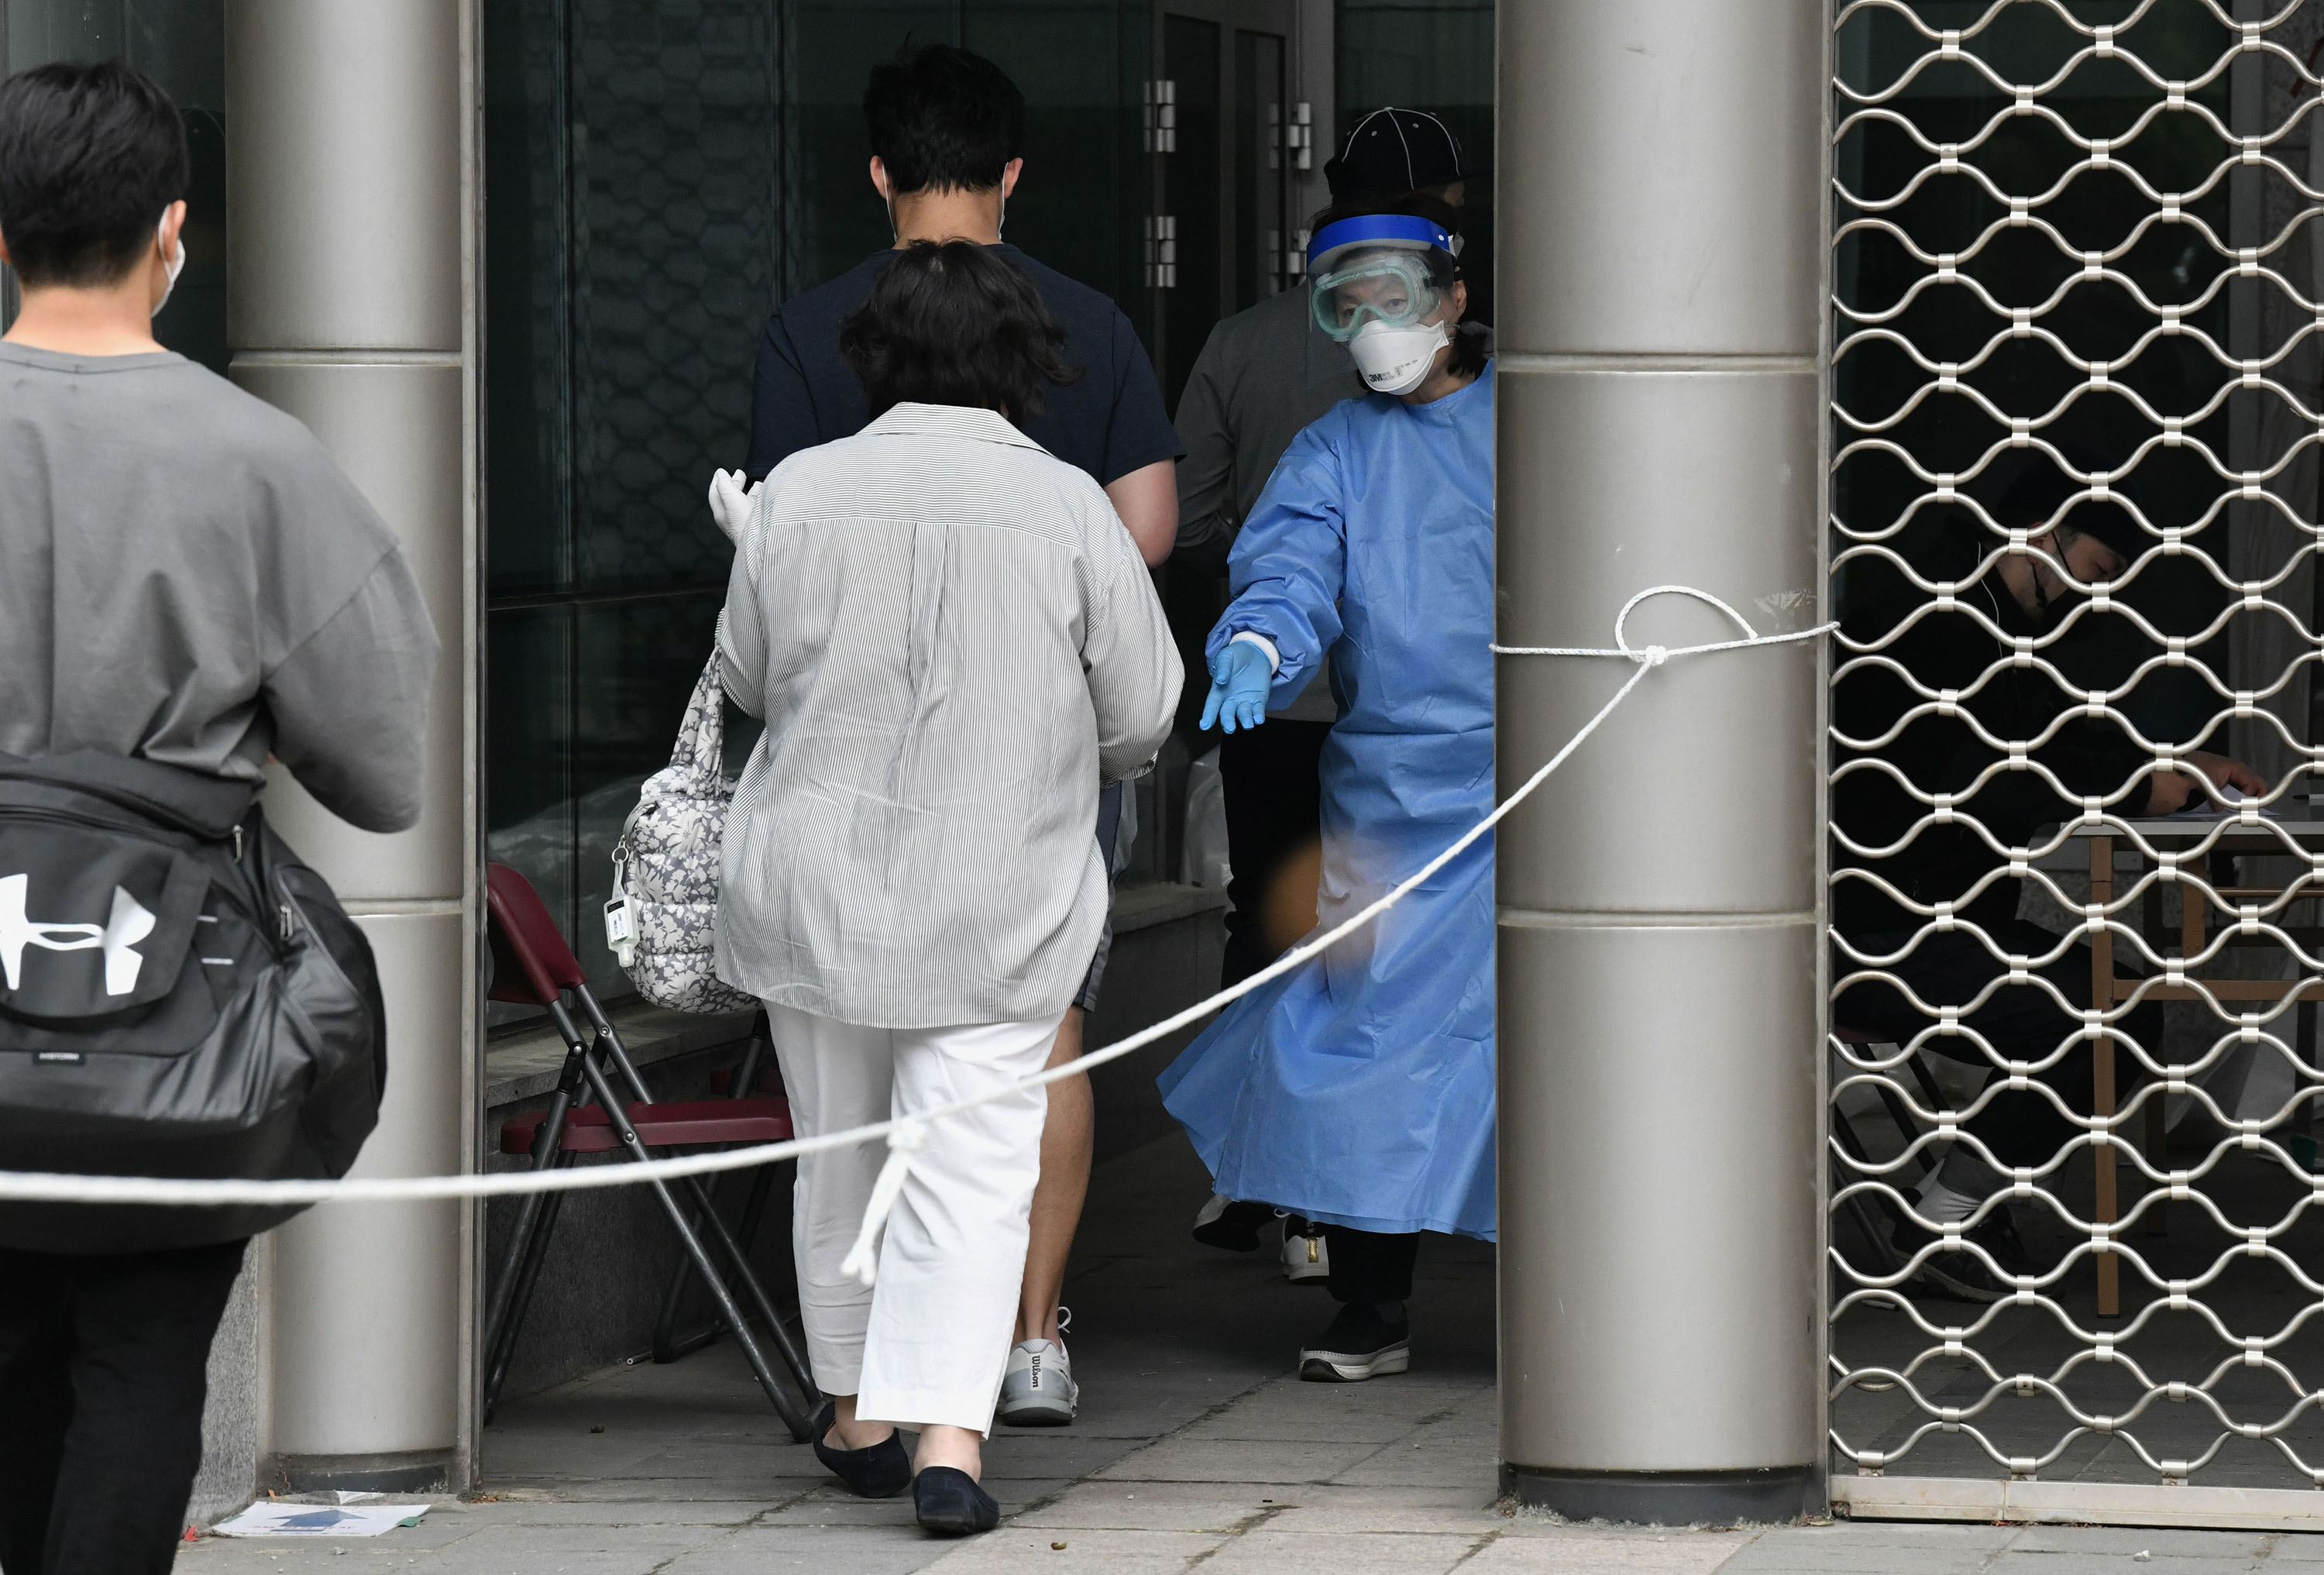 A medical staff member wearing personal protective equipment (PPE) guides visitors for COVID-19 testing at a testing station in the nightlife district of Itaewon in Seoul, Korea, on Tuesday, May 12.